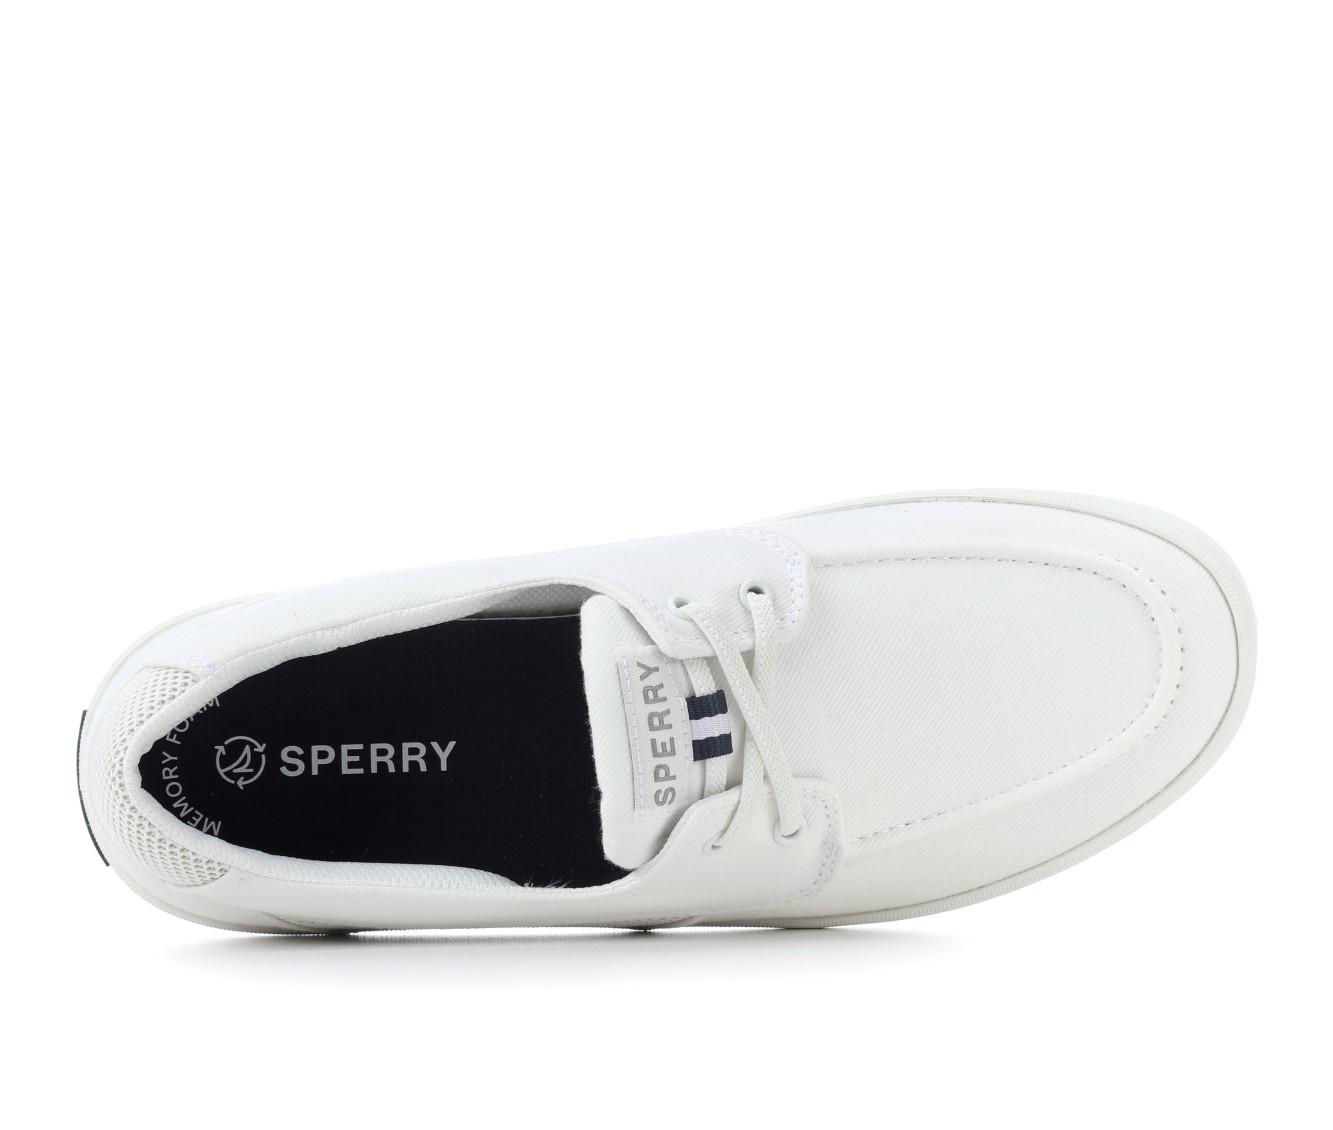 Men's Sperry Seacycled Bowery Dress Shoes